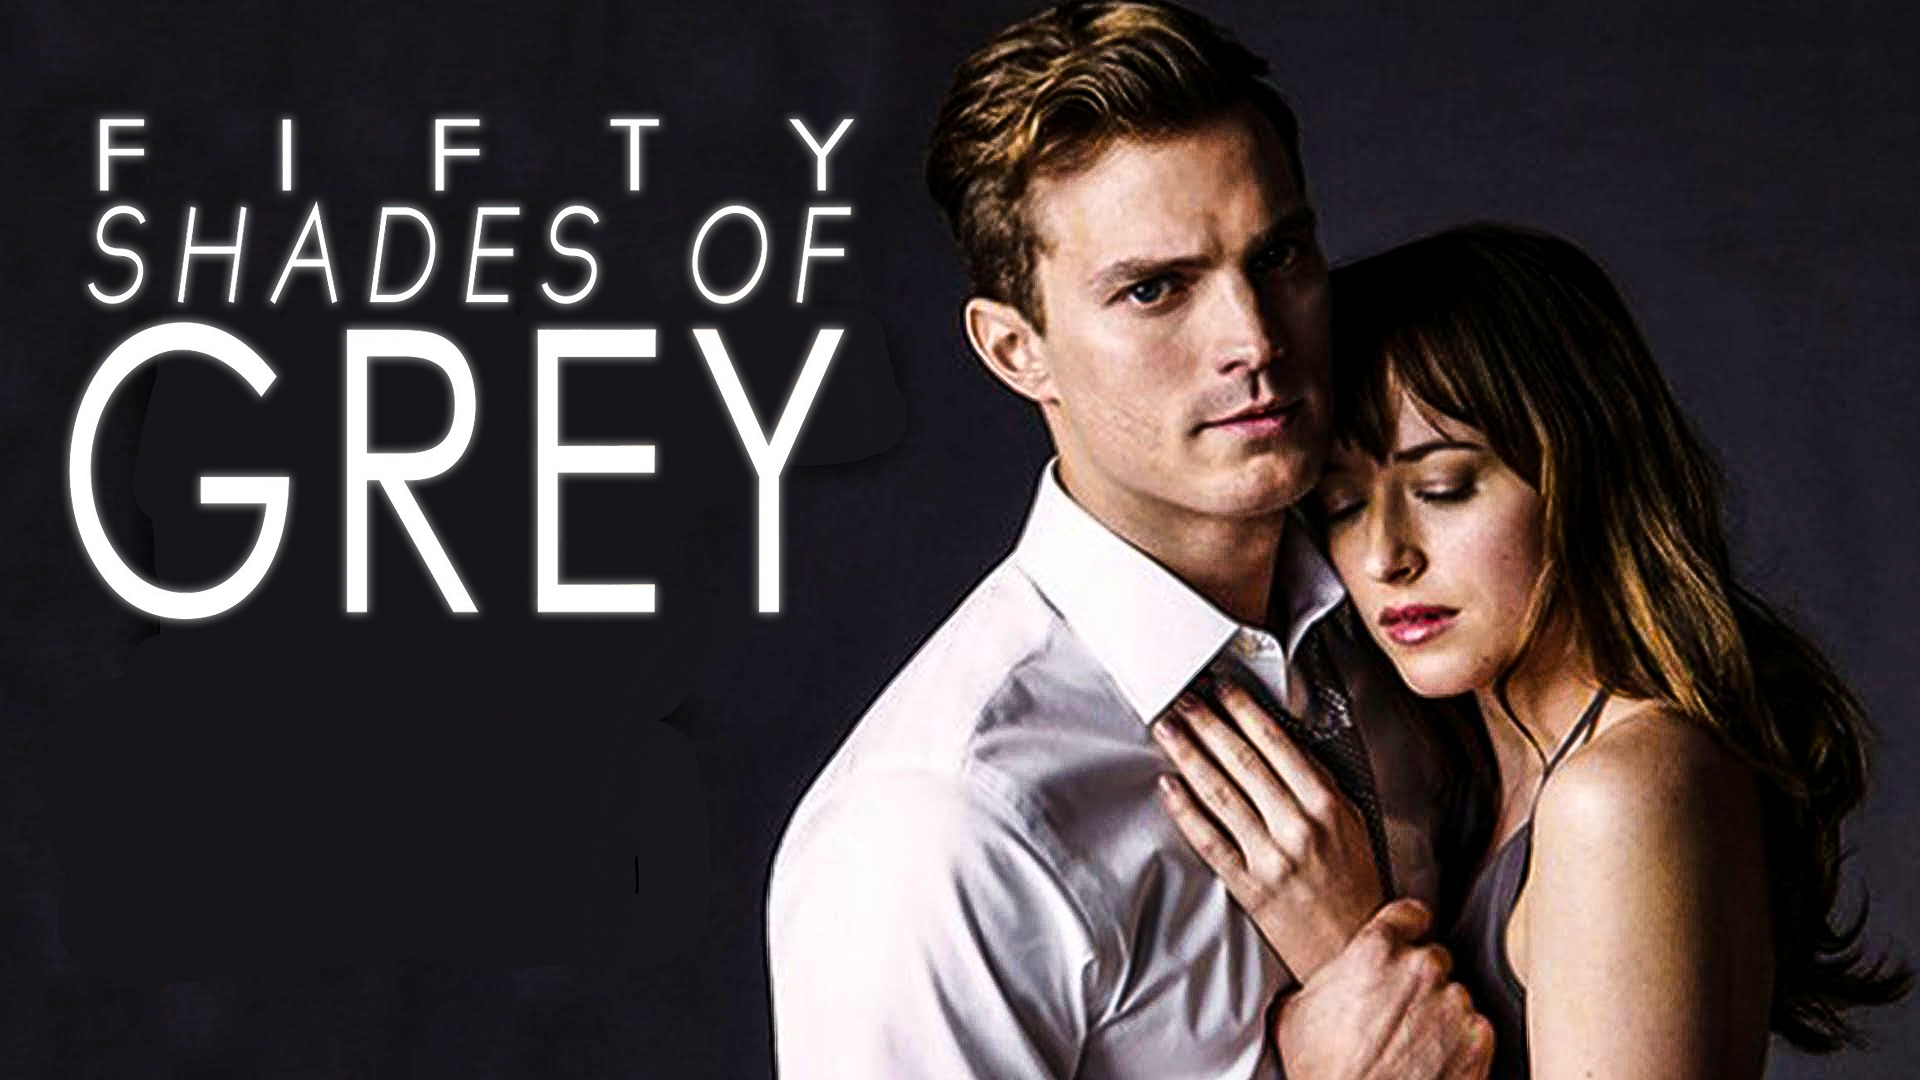 50 Shades Of Grey Live Chat Gets An Online Twitter Spanking - B&T - Where Can I Watch Fifty Shades Of Grey For Free